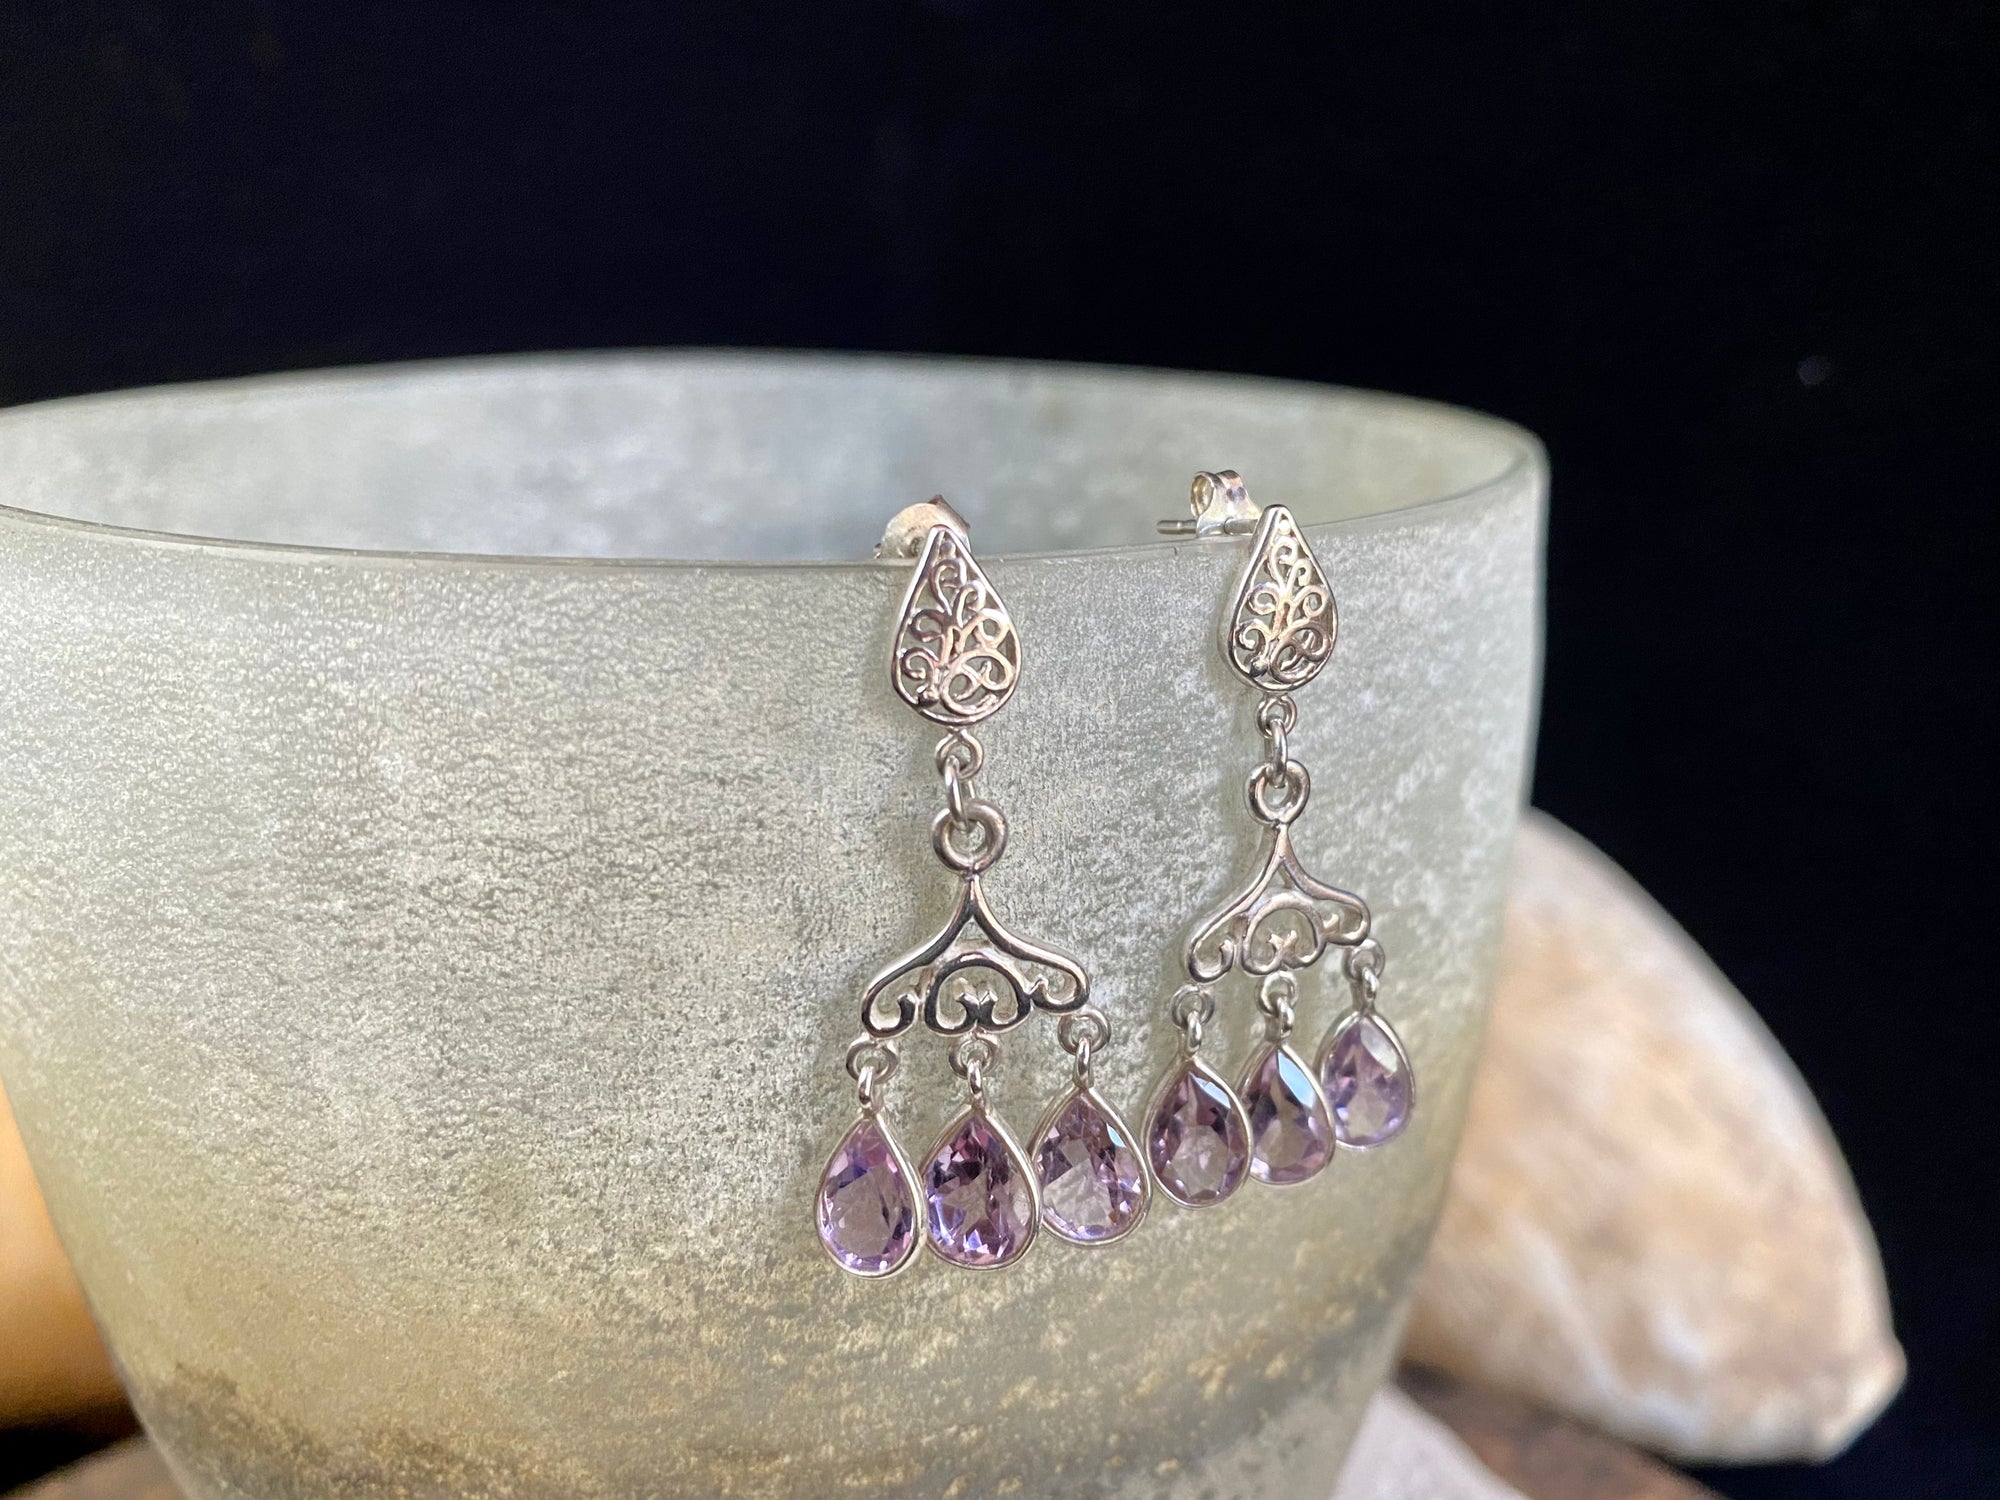 Amethyst chandelier earrings set in filigree silver with a post and butterfly back attachment. The matching light purple teardrop shape amethyst stones are facet cut to display their excellent quality and sparkle as they move en tremblant.